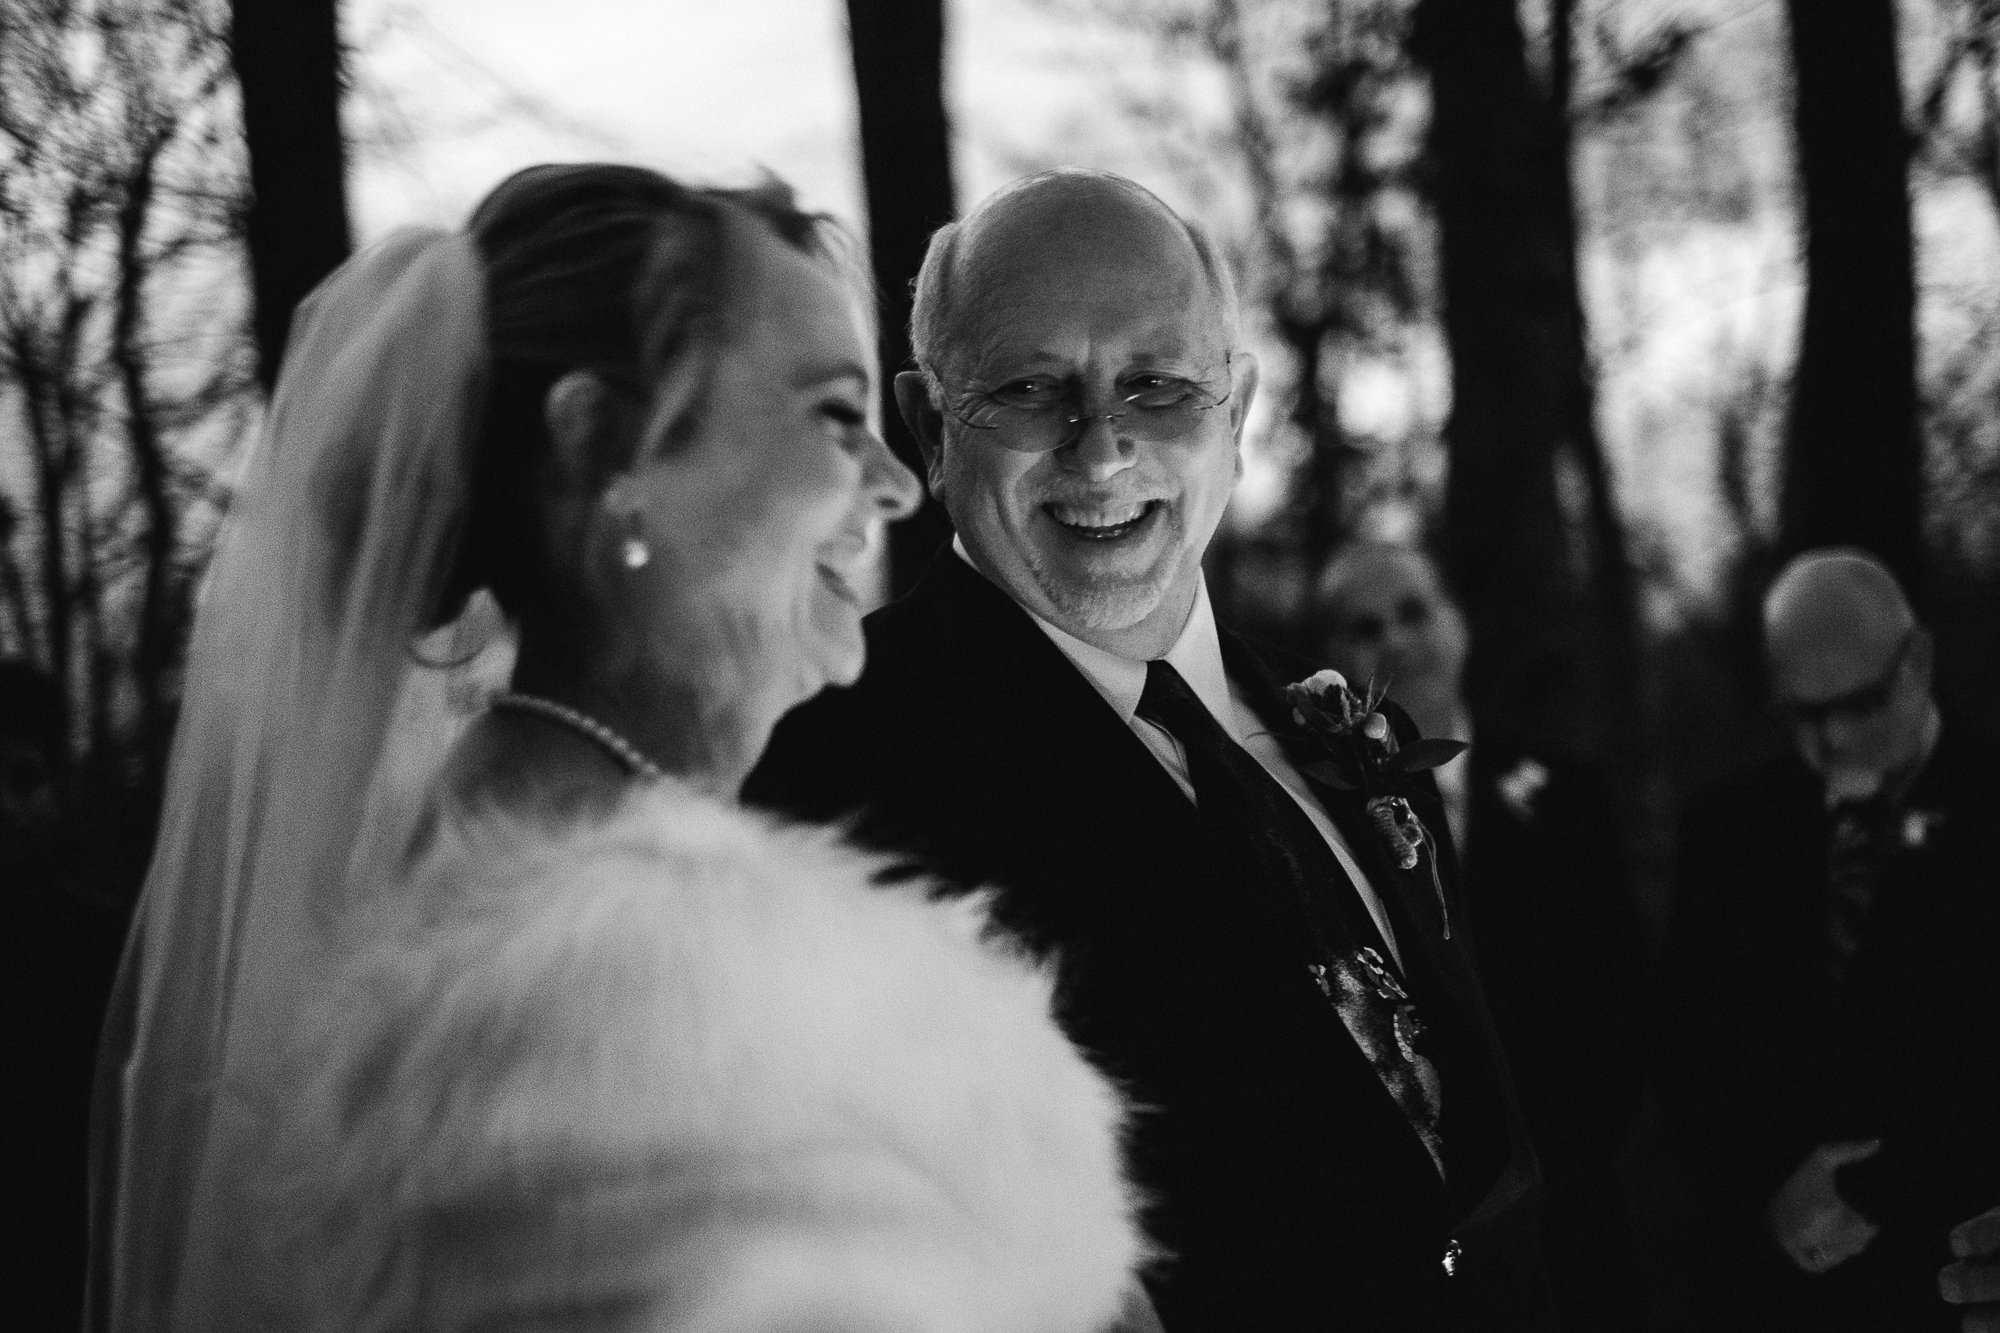 Candid shot of bride and groom laughing during ceremony